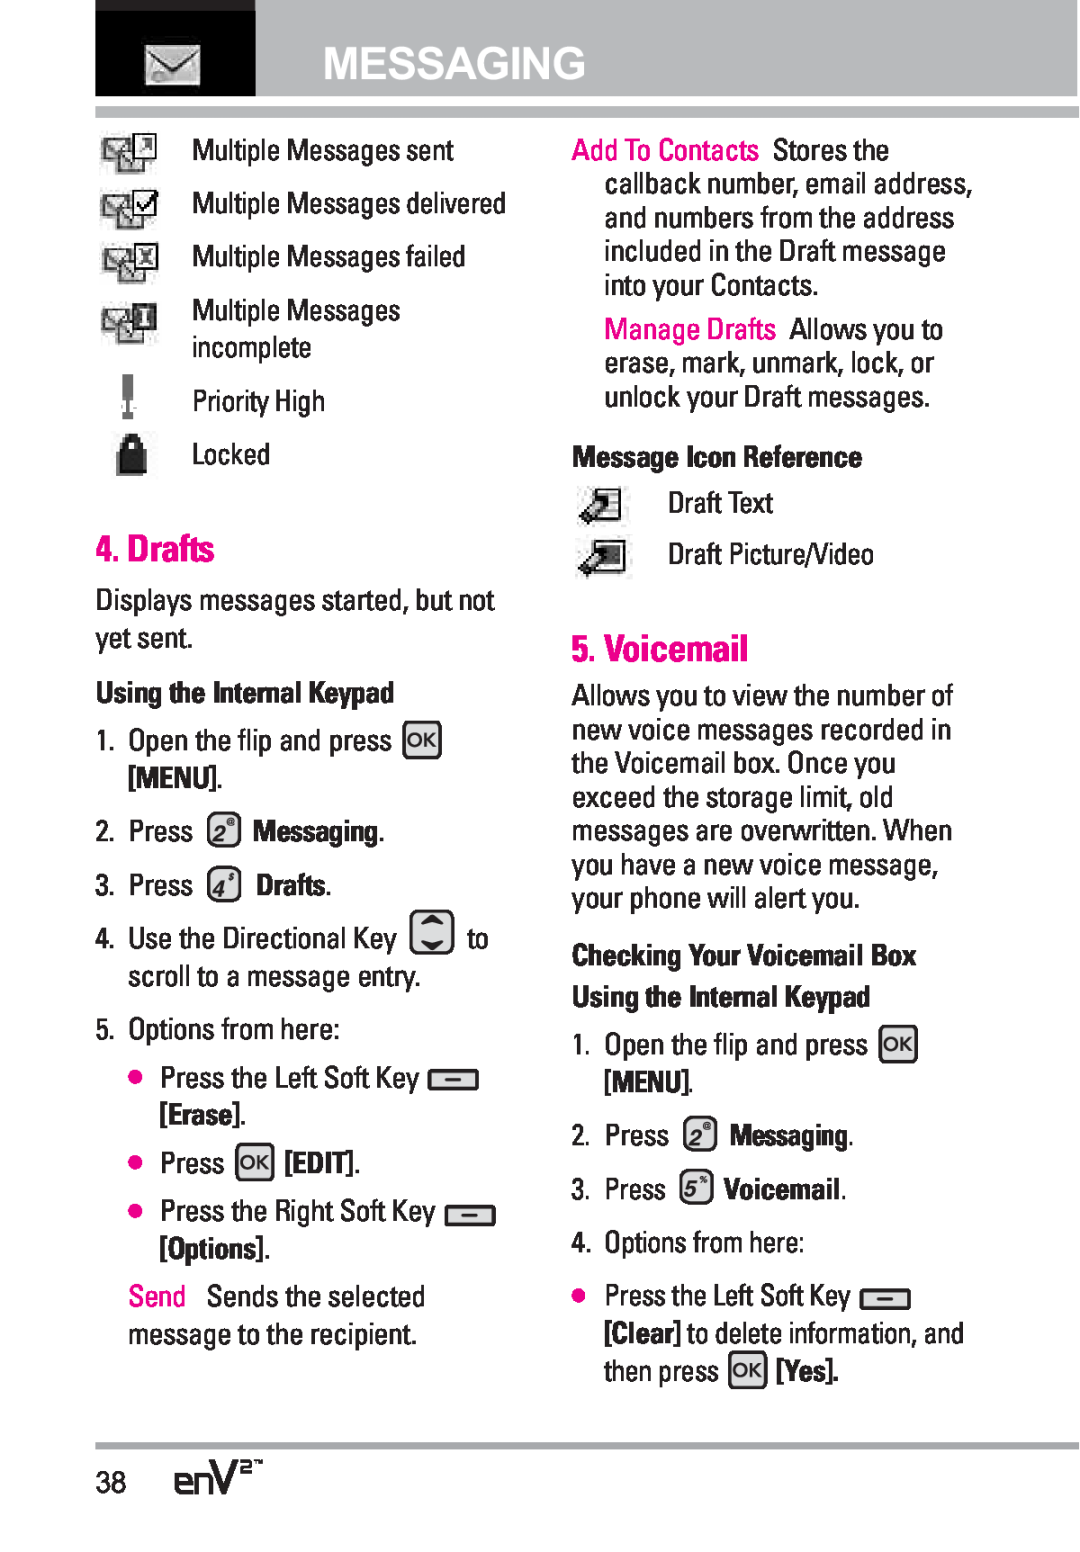 LG Electronics EnV2 manual Drafts, Voicemail, Using the Internal Keypad, Press Messaging, Message Icon Reference 